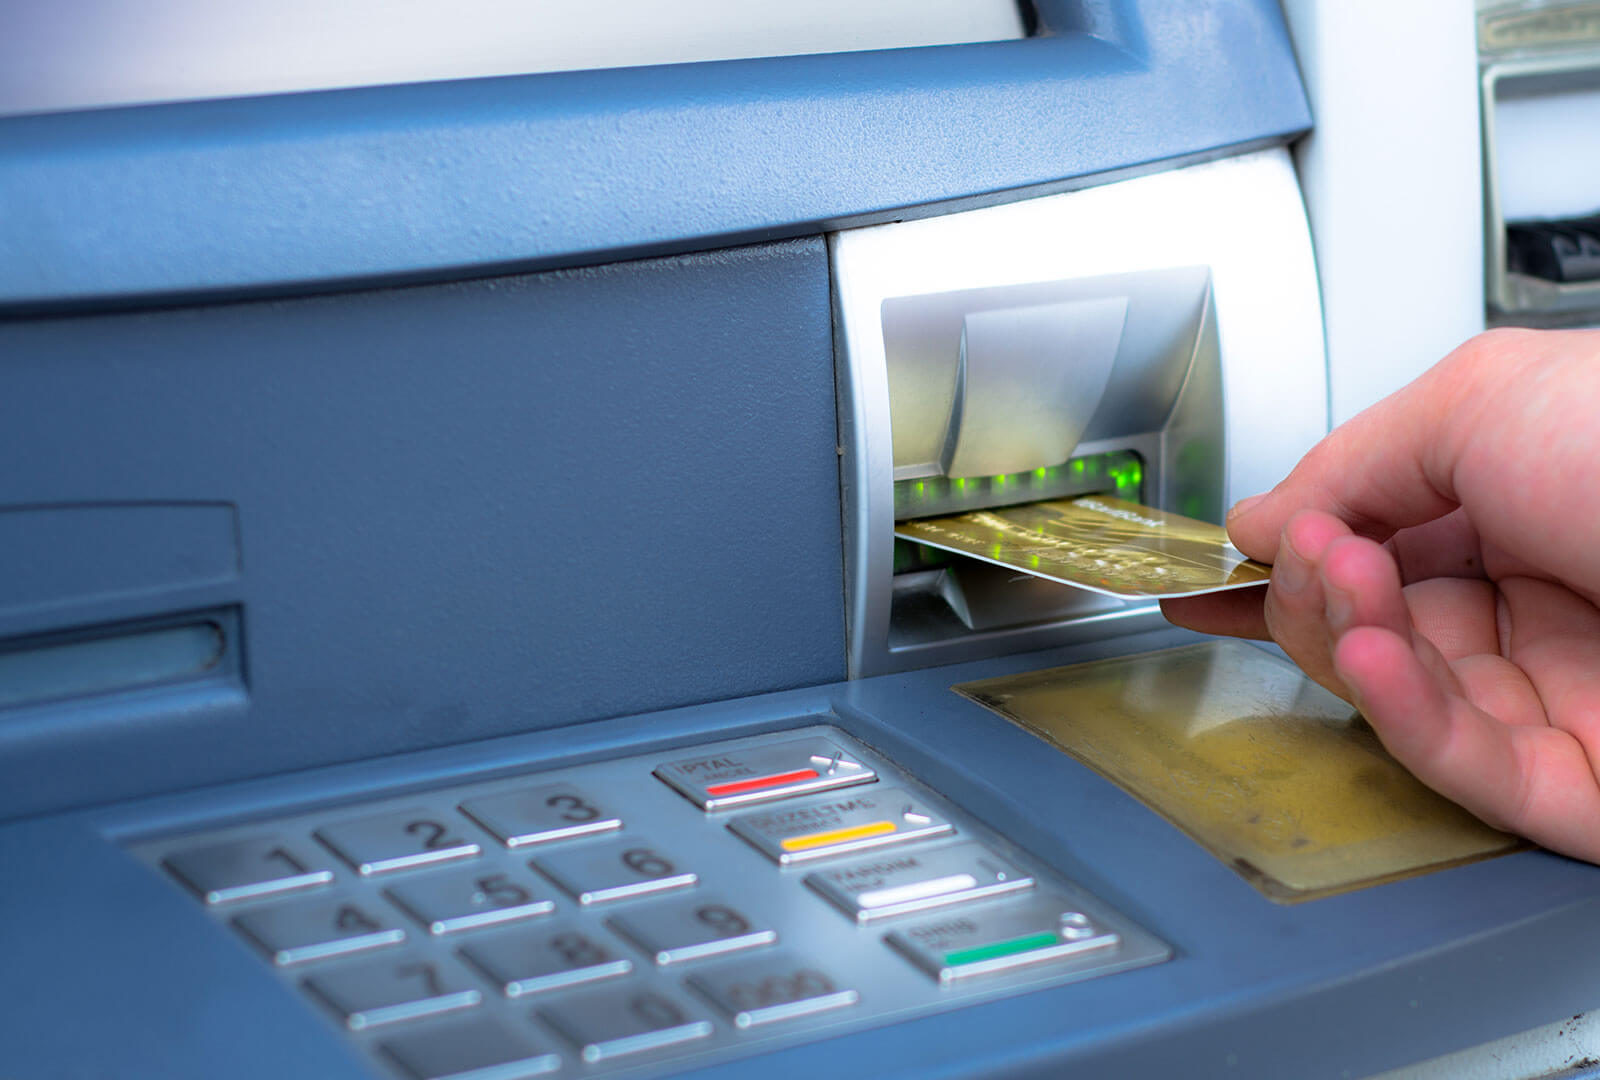 Hand inserting a debit card into an ATM.